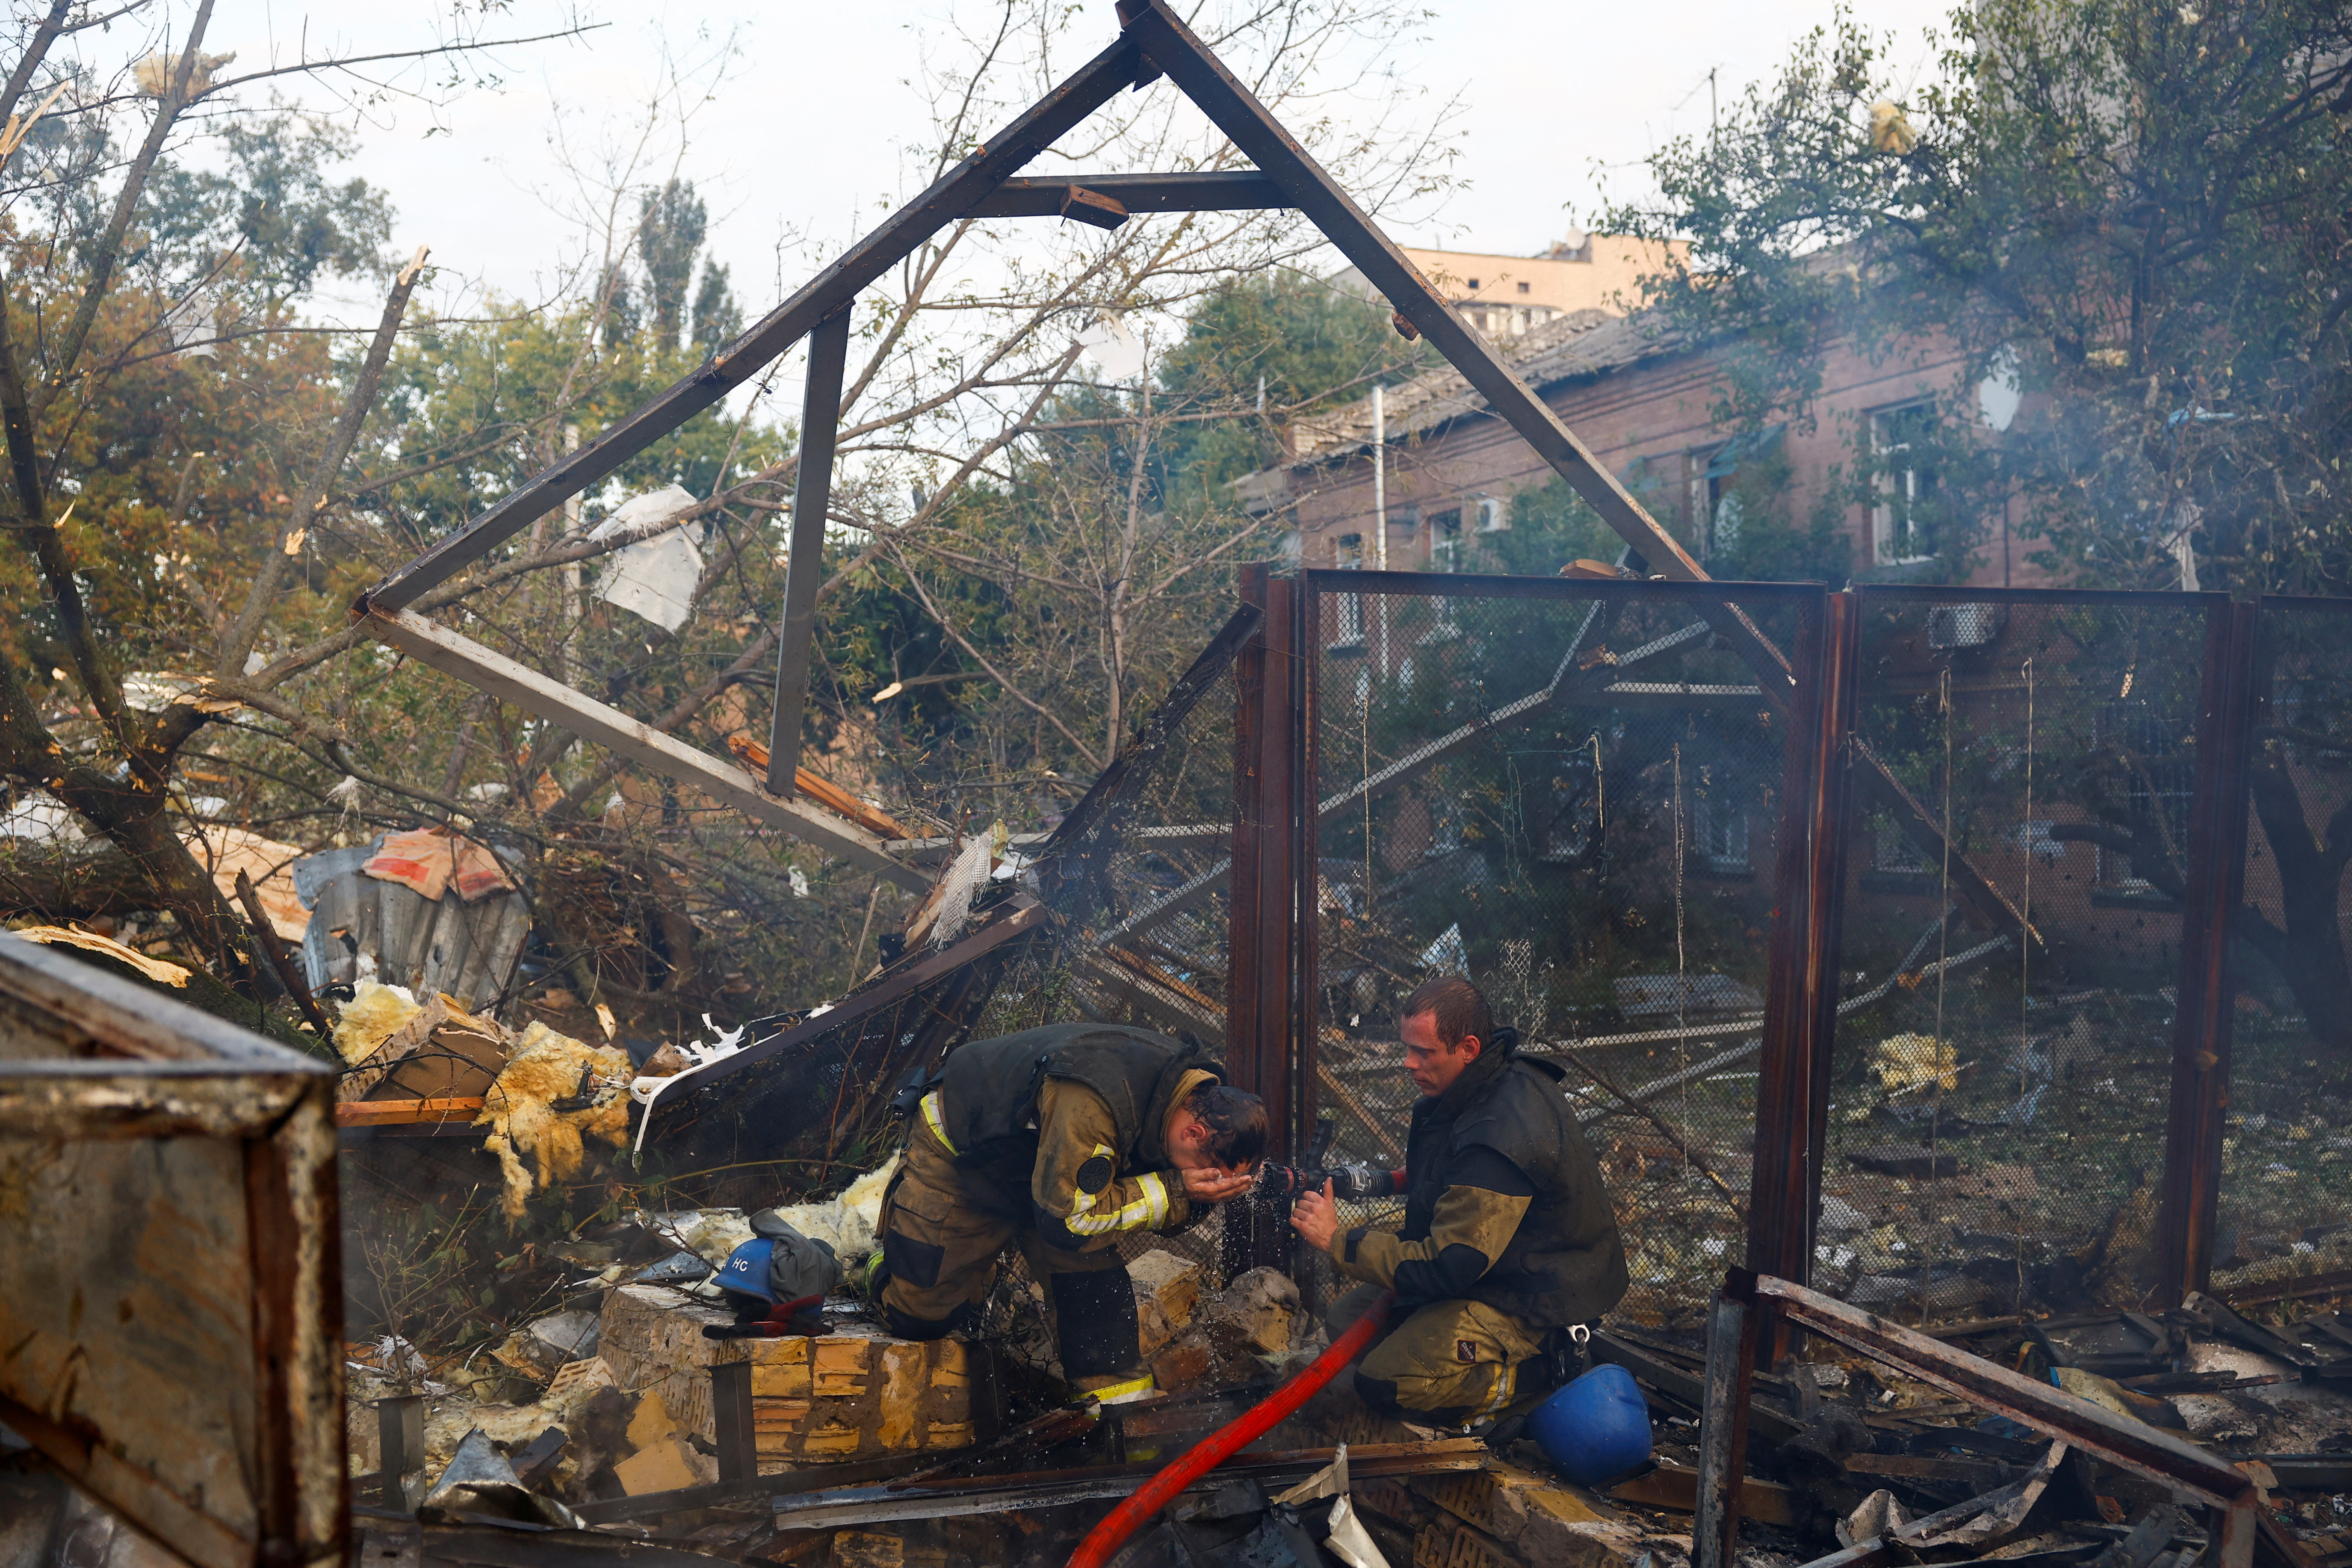 Firefighters work at a site damaged during a Russian missile strike, in Kyiv